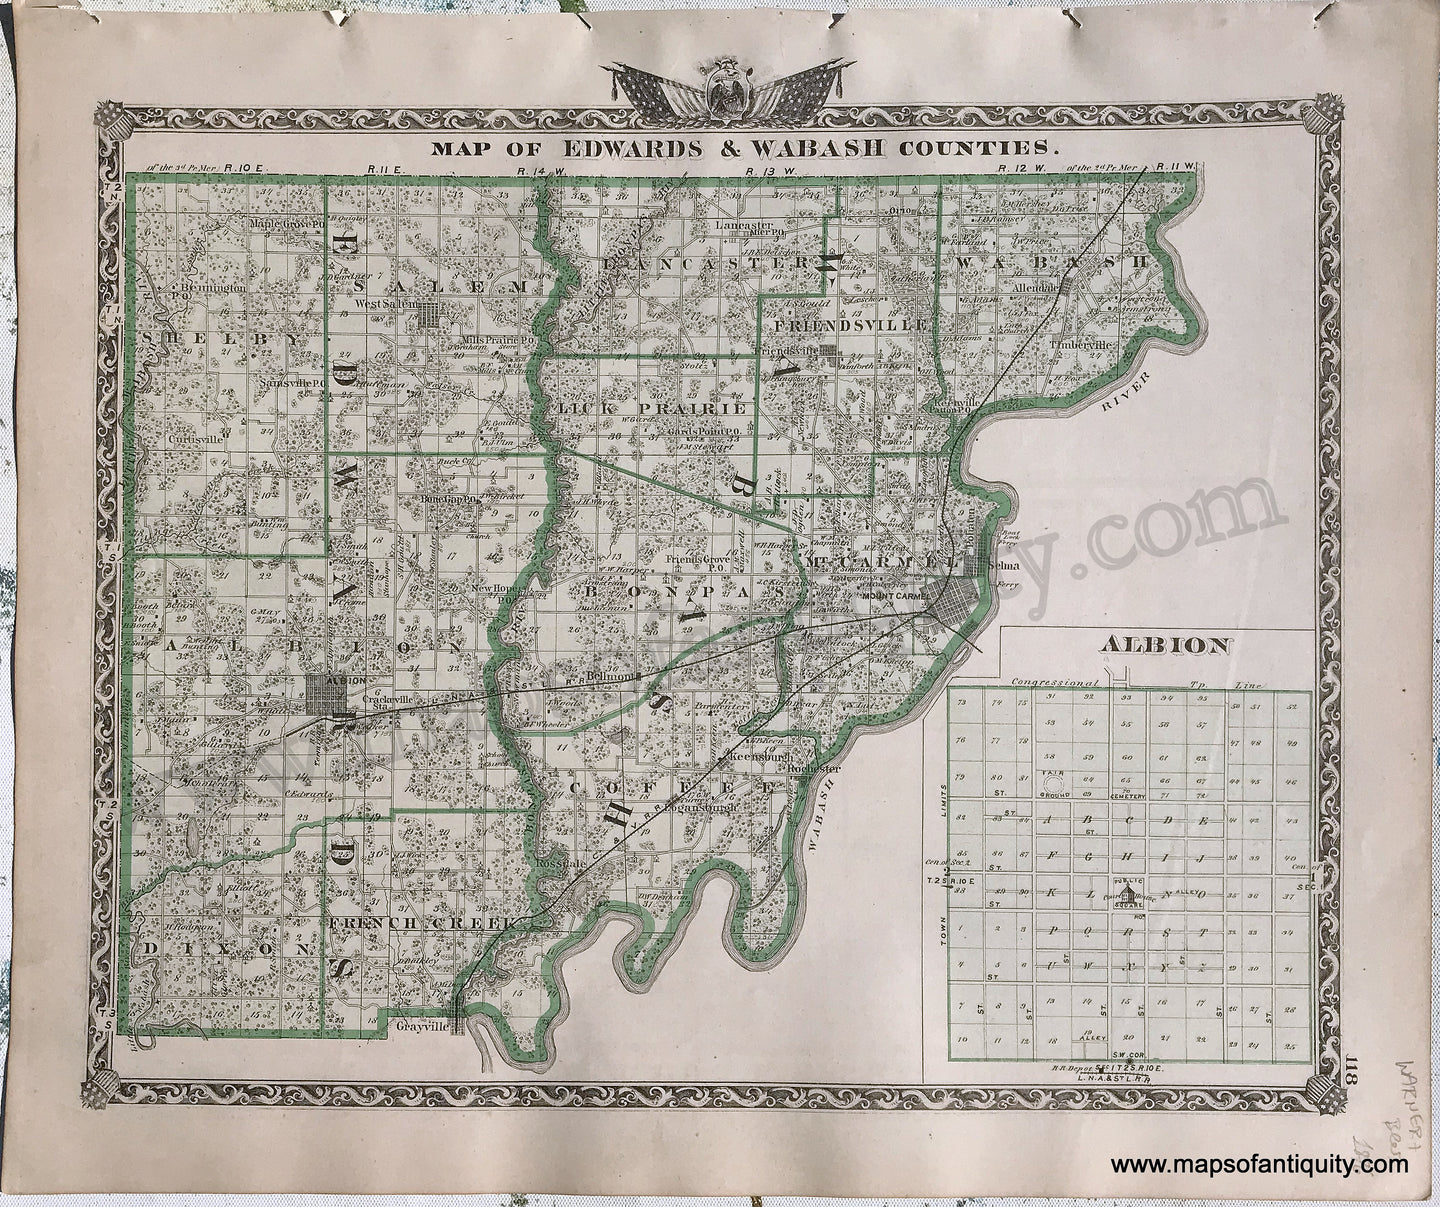 Antique-Hand-Colored-Map-Edwards-&-Wabash-Counties;-verso:-Wayne-County-Illinois-1876-Warner-&-Beers-/-Union-Atlas-Co.-Midwest-1800s-19th-century-Maps-of-Antiquity